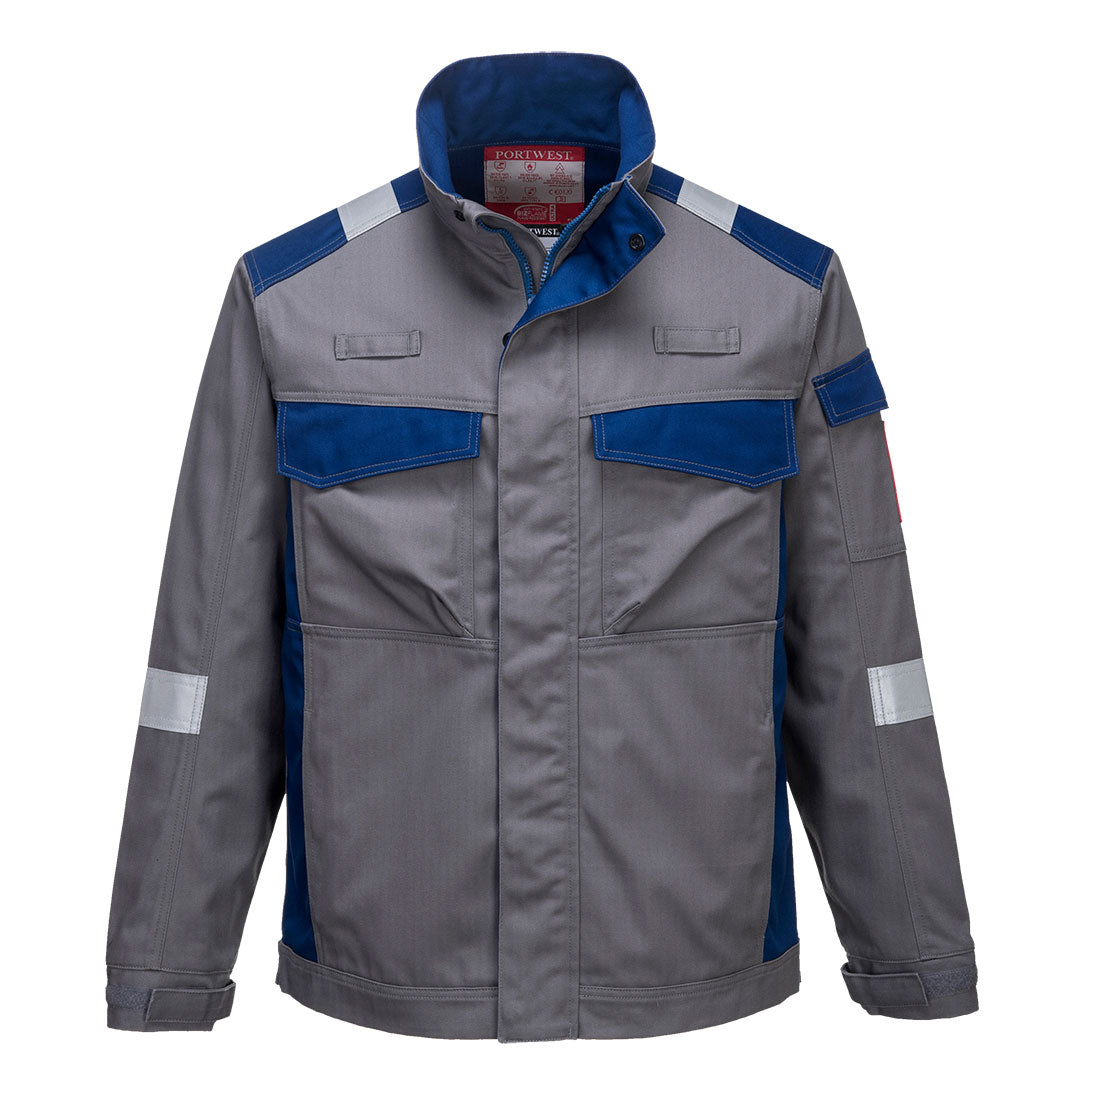 Bizflame Industry Two Tone Jacket  (FR08)